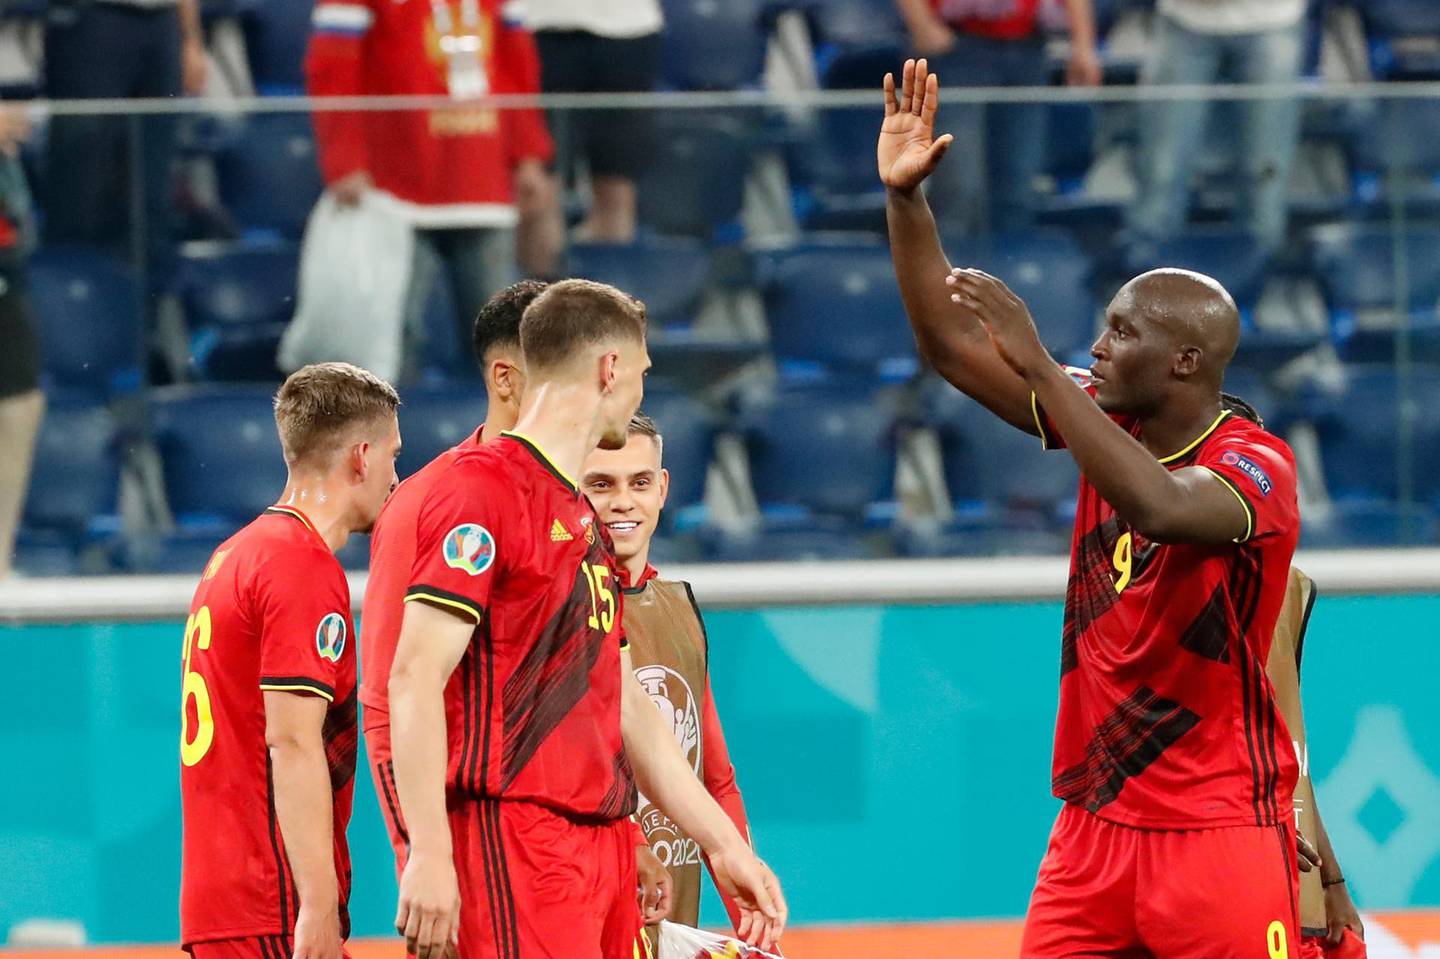 Belgium's Romelu Lukaku, right, salutes supporters at the end of the Euro 2020 soccer championship group B match between Belgium and Russia at the Saint Petersburg stadium in St. Petersburg, Russia, Saturday, June 12, 2021. Belgium beat Russia 3-0.(Anatoly Maltsev/Pool via AP)